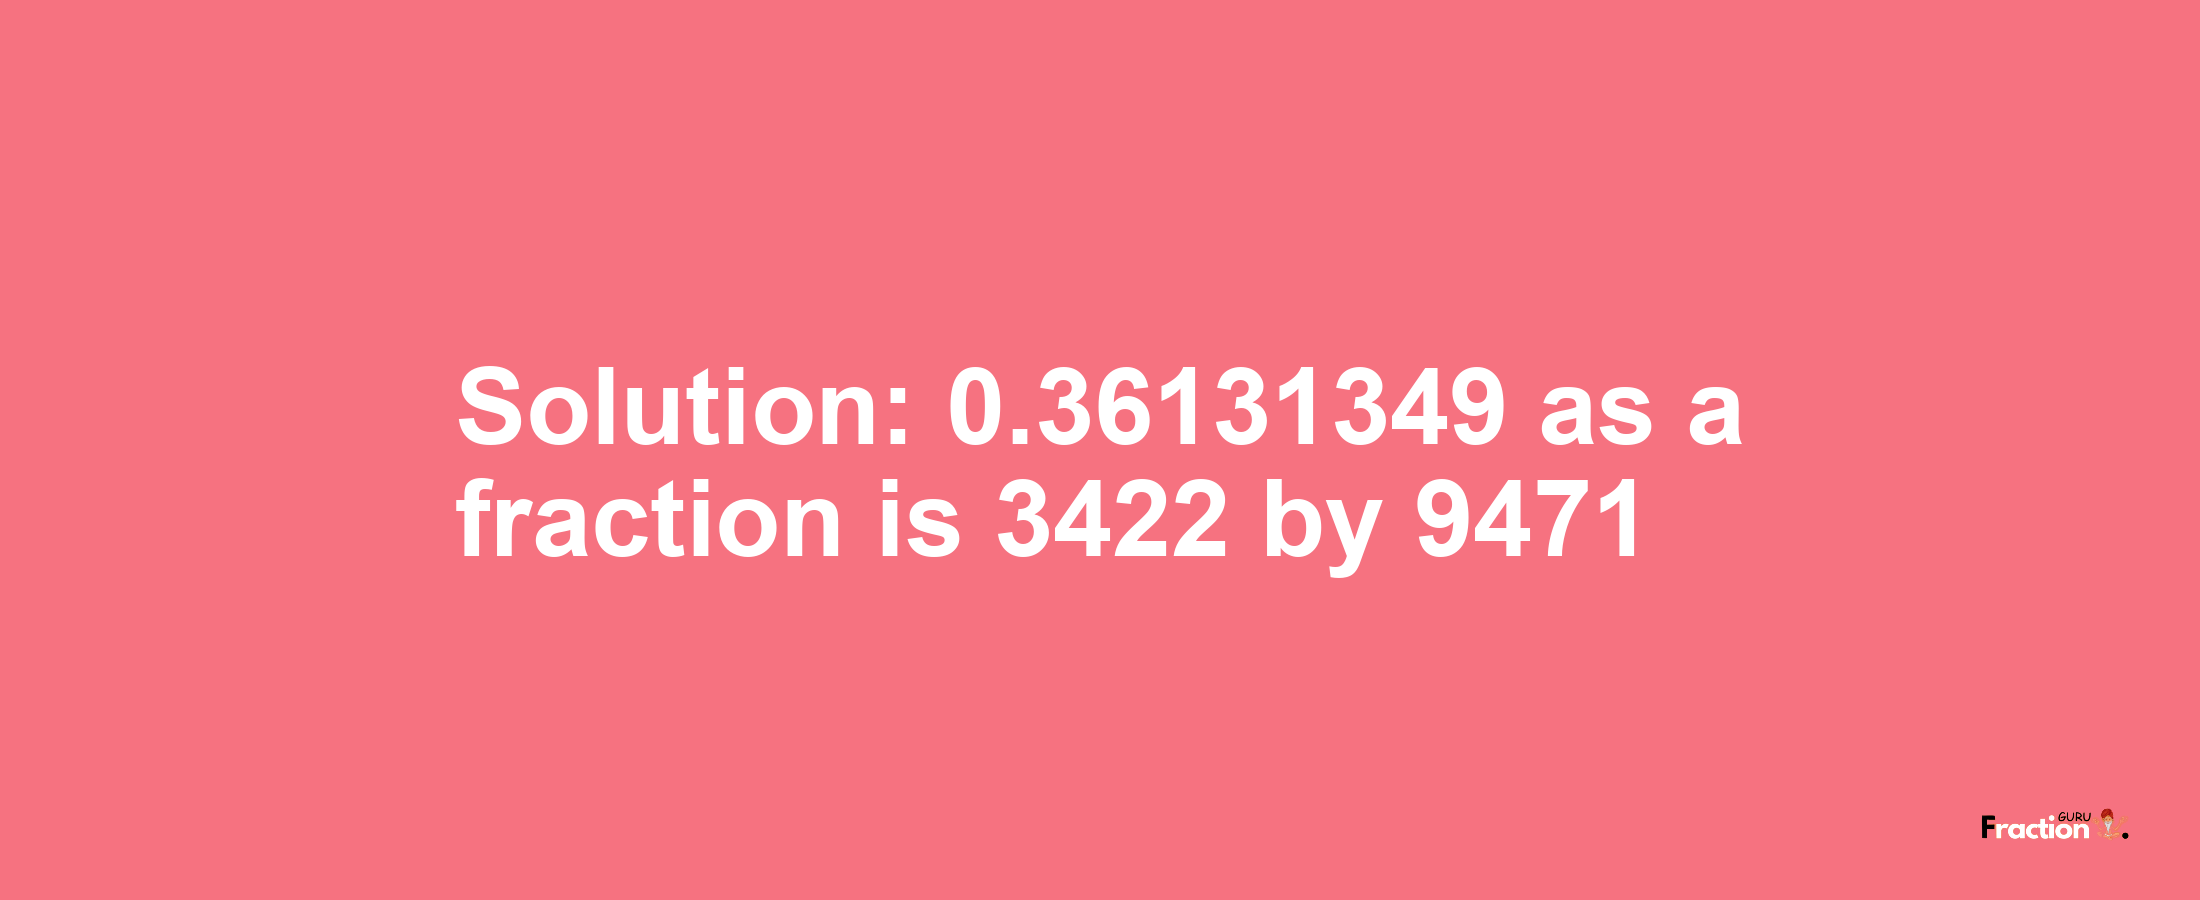 Solution:0.36131349 as a fraction is 3422/9471